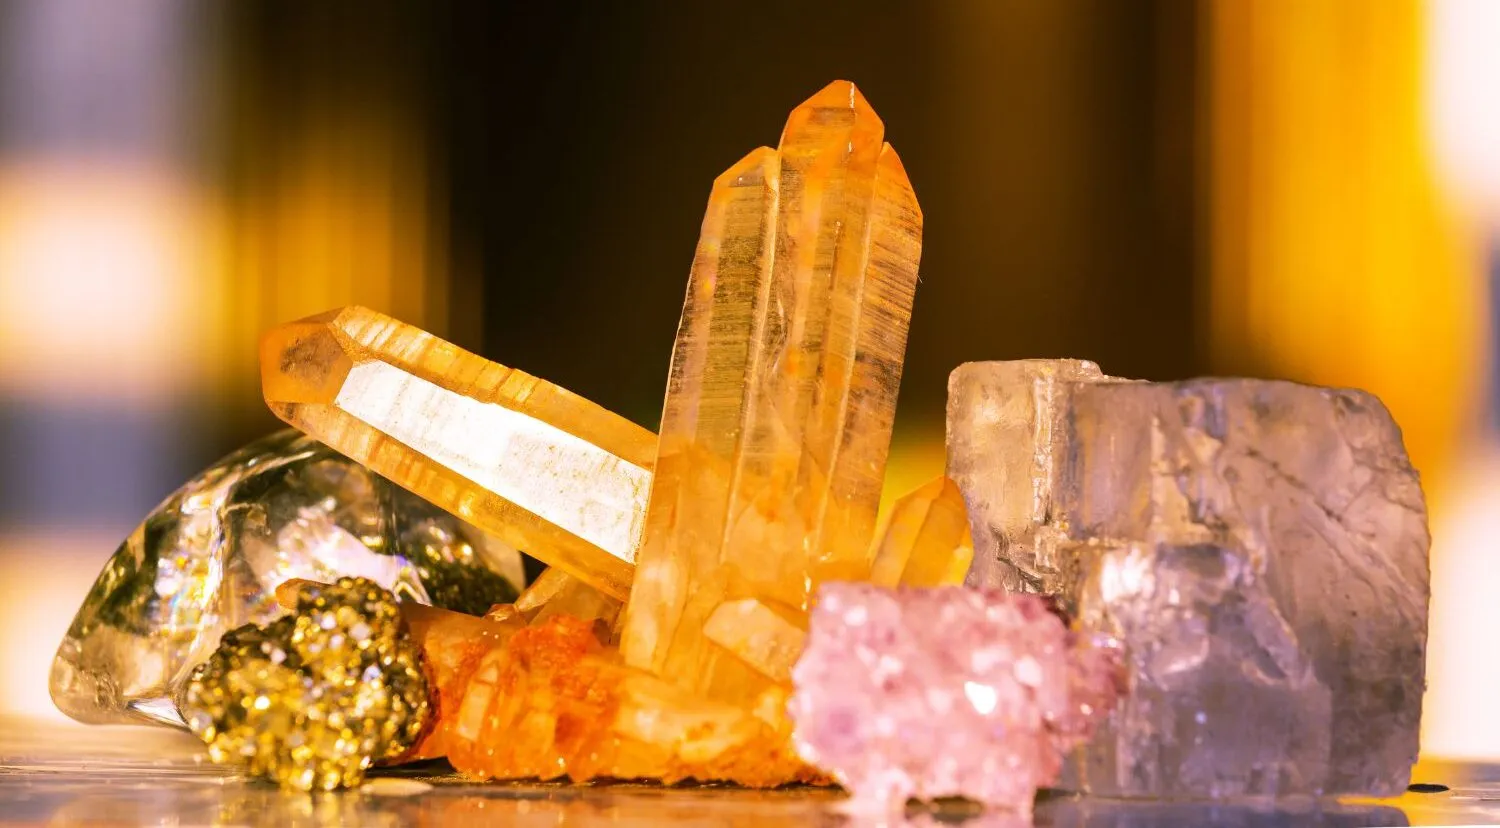 The hardness of minerals can be checked on the Mohs scale.